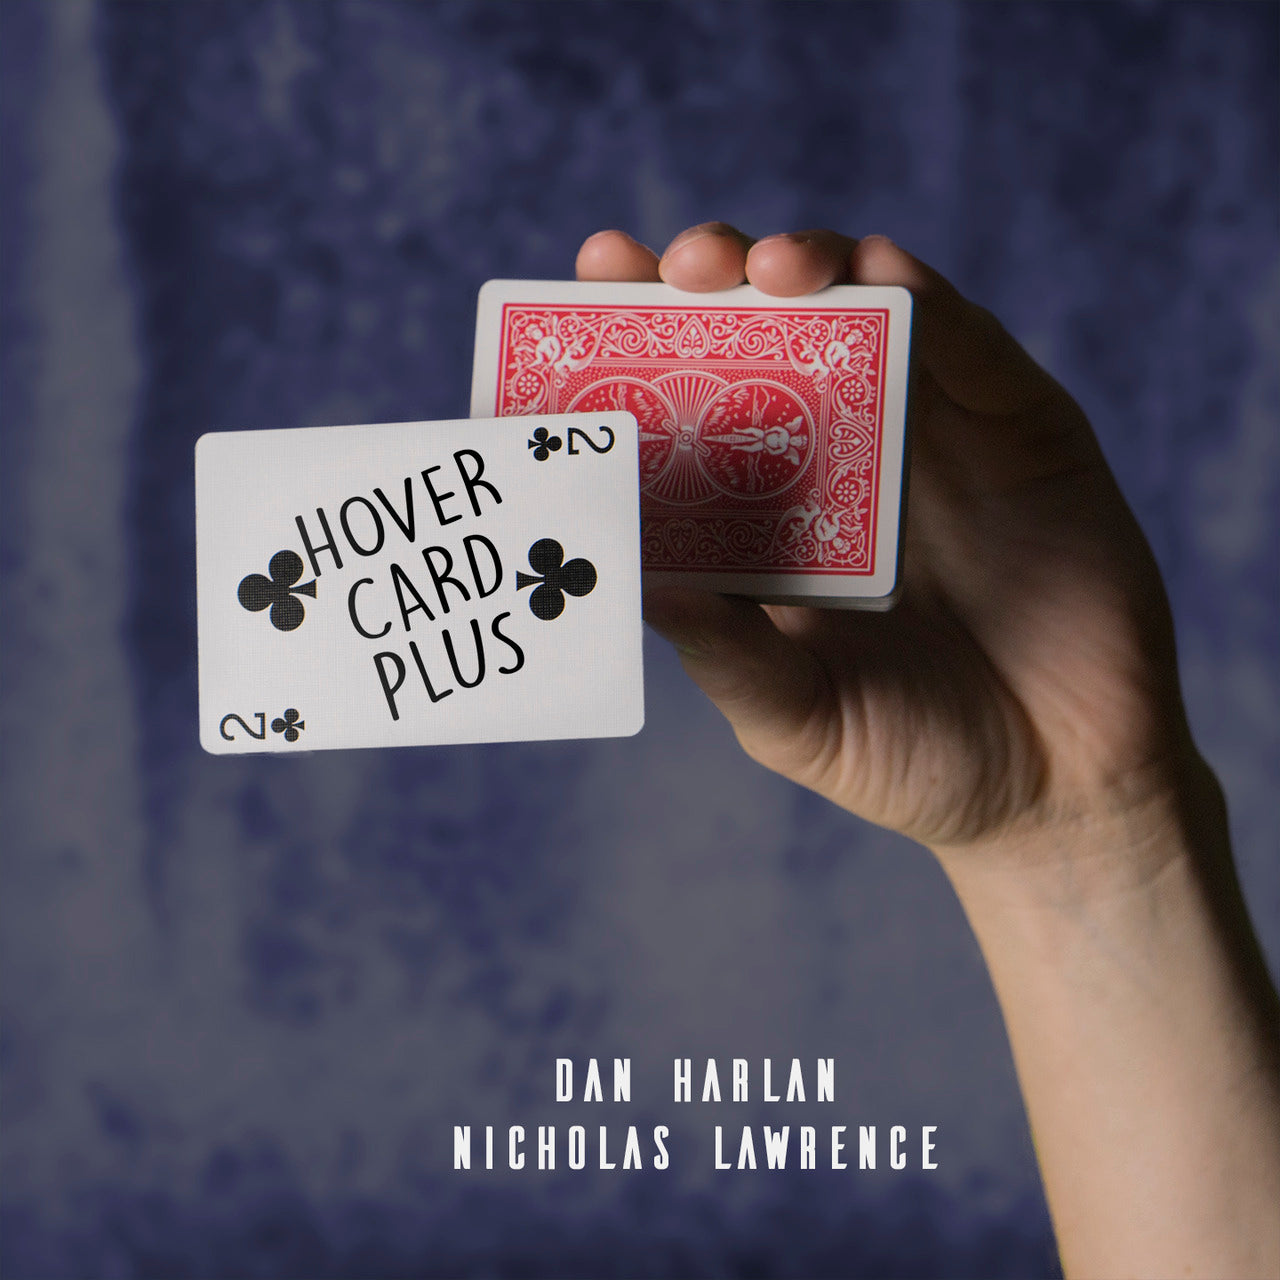 Hover Card Plus by Dan Harlan and Nicholas Lawrence - Available at pipermagic.com.au